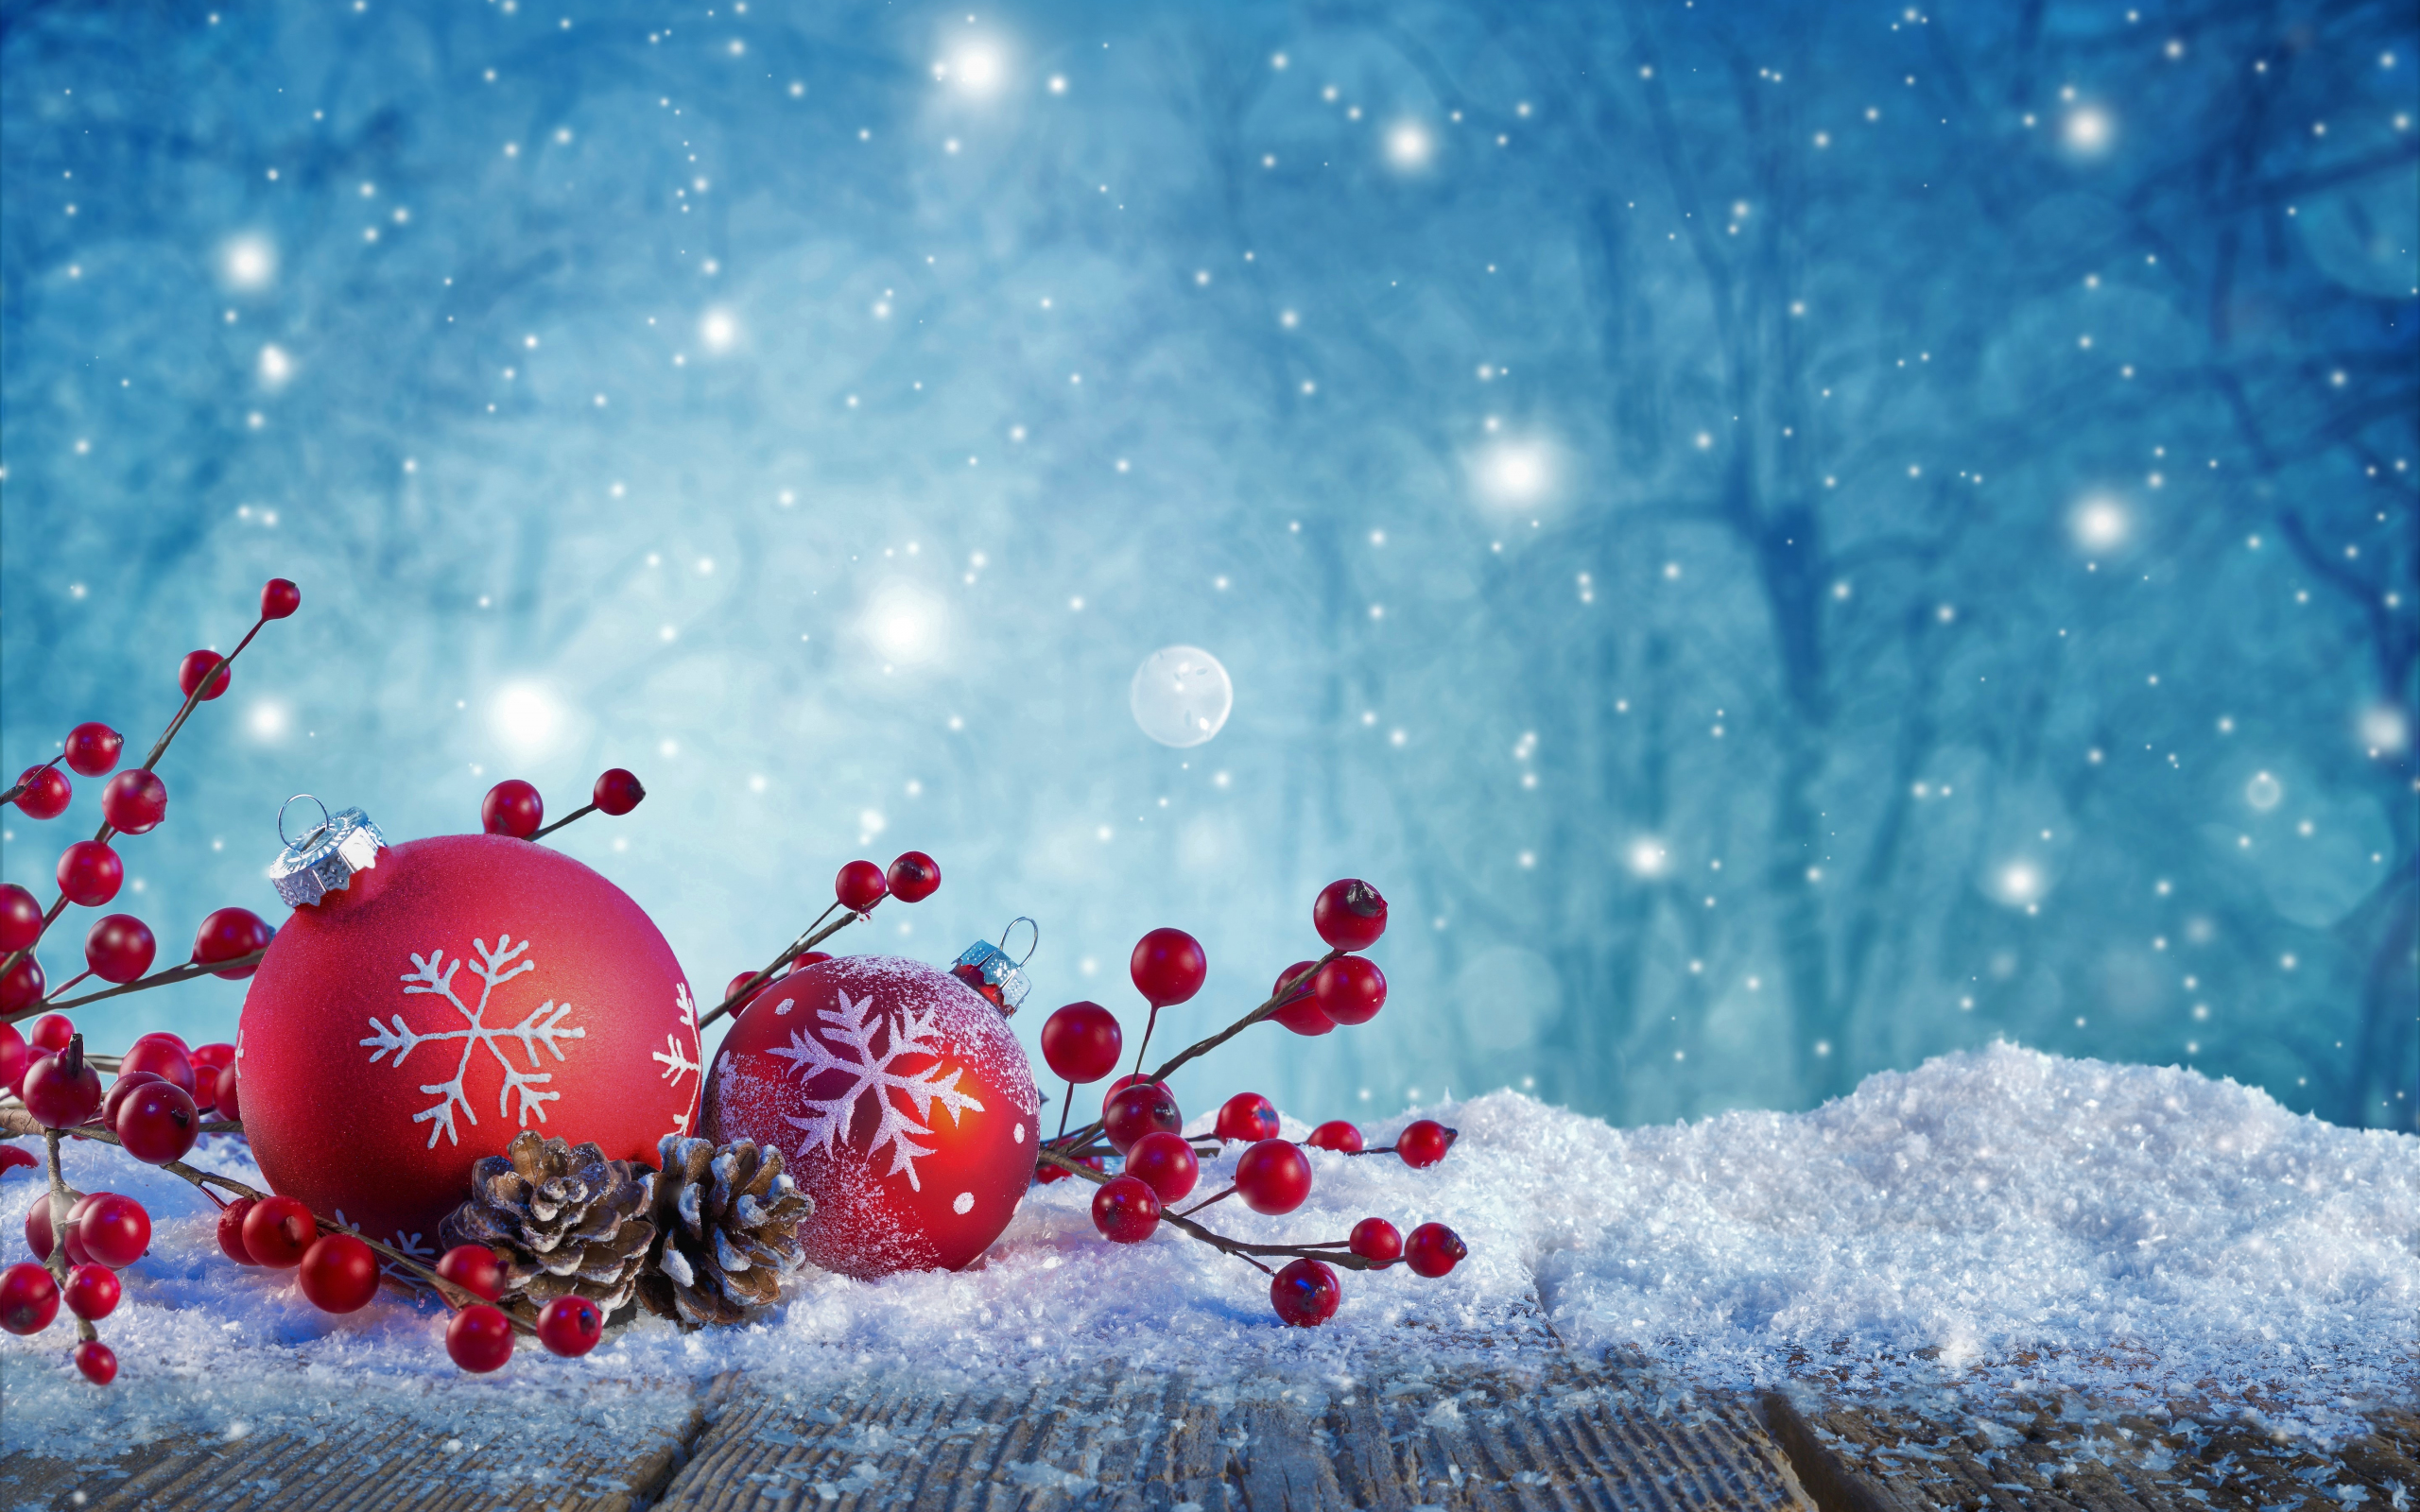 Download 2560x1600 wallpaper christmas, ornaments, decorations, holiday, dual wide, widescreen 16: widescreen, 2560x1600 HD image, background, 1320